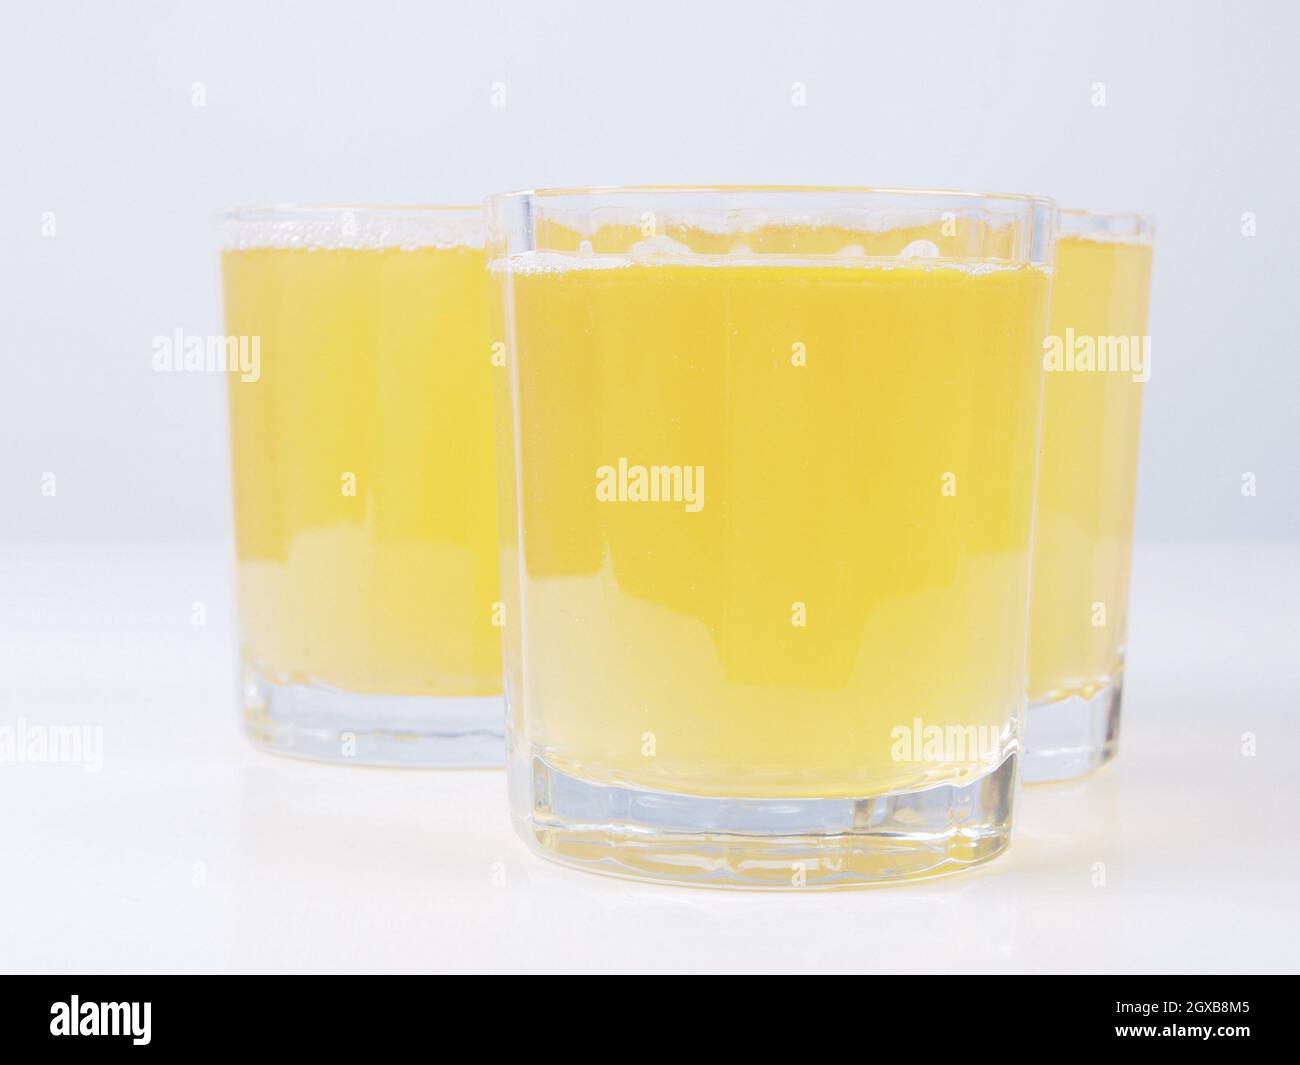 Glasses of pineapple juice on continental breakfast table. Stock Photo